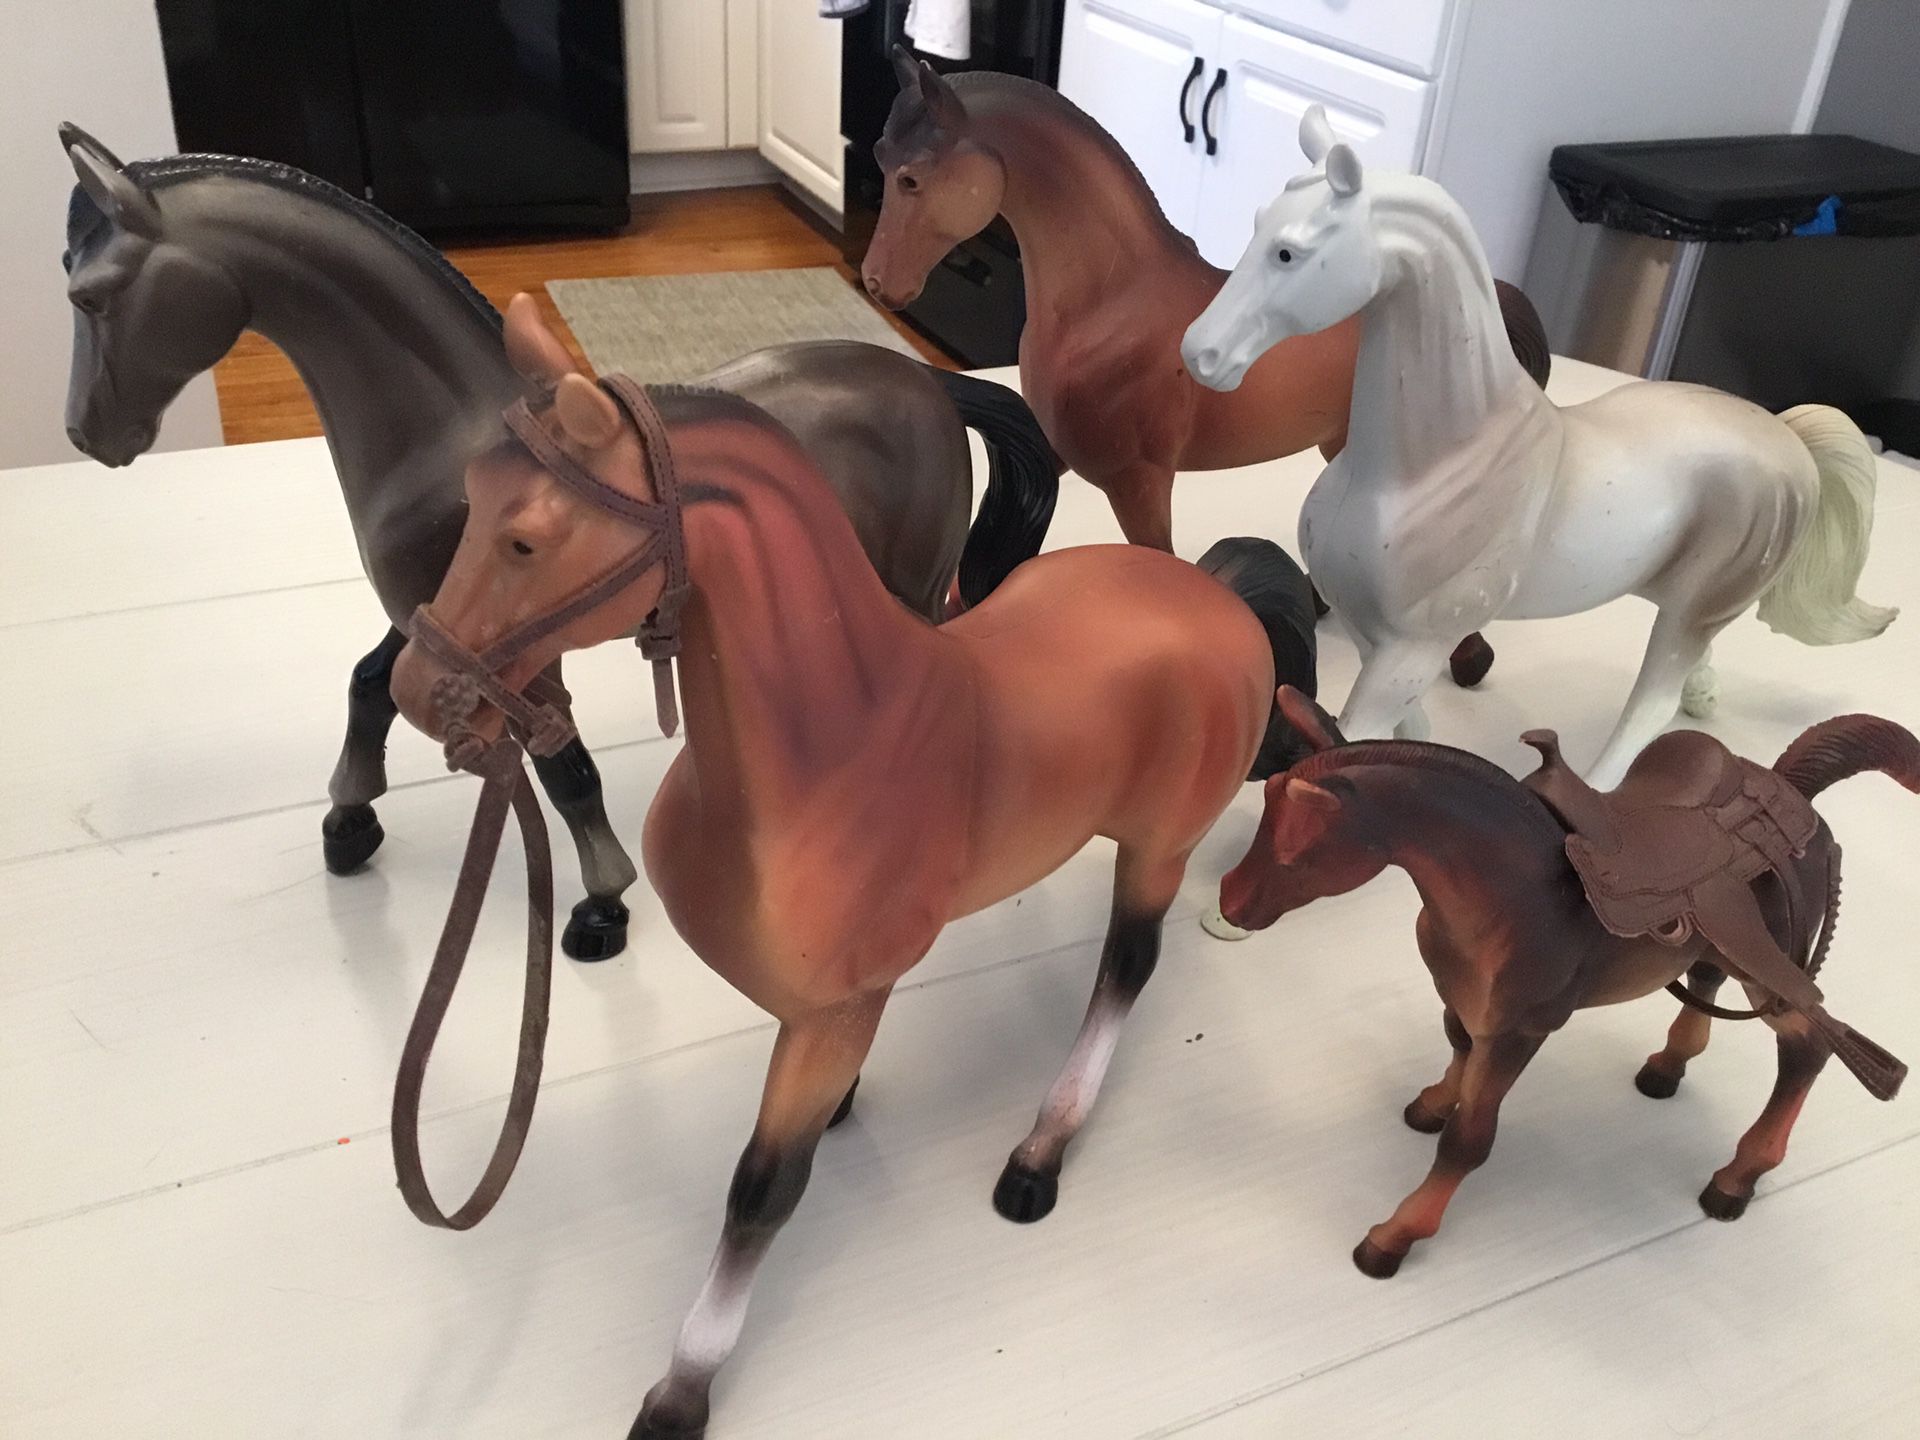 Cute Collectible Plastic Horses for Display or Play